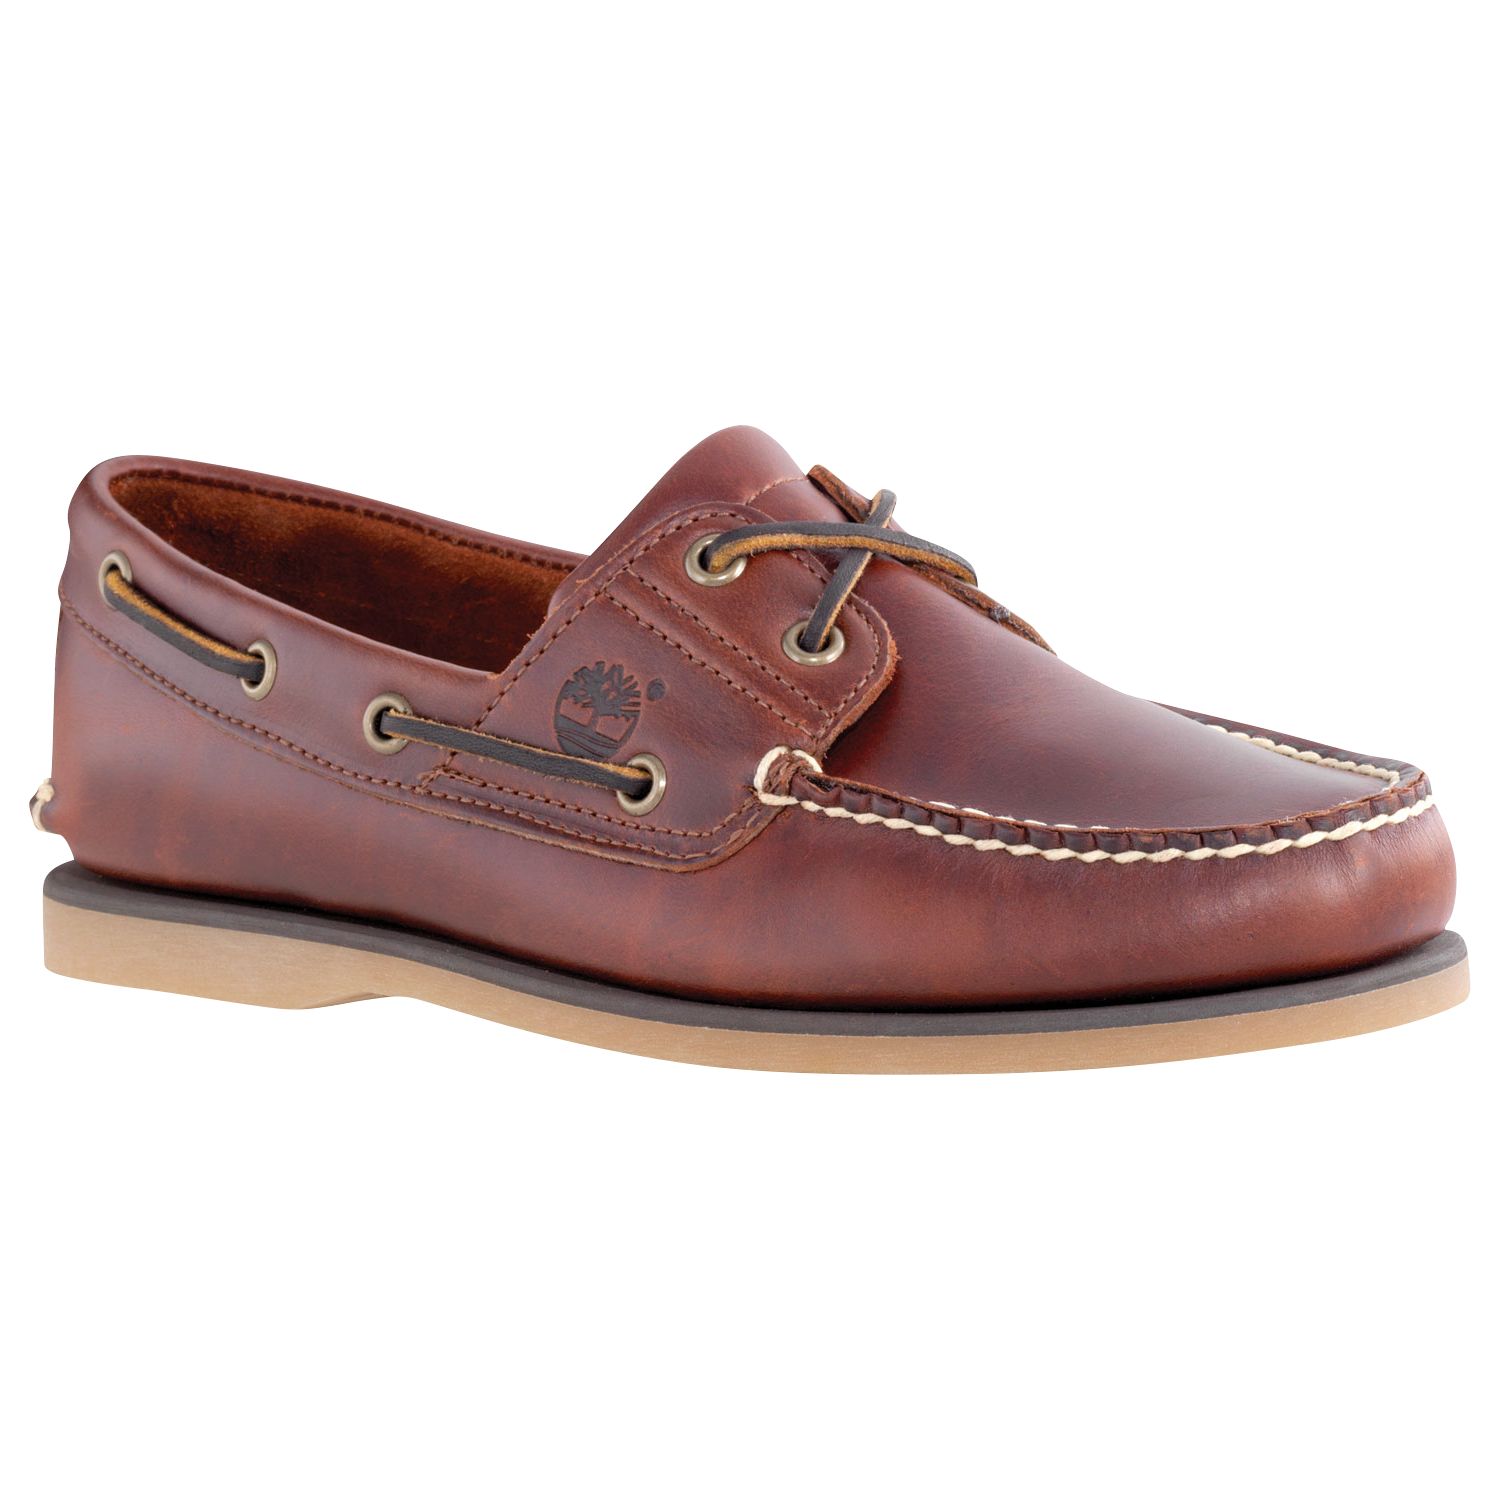 Buy Timberland Leather Boat Shoes Online at johnlewis